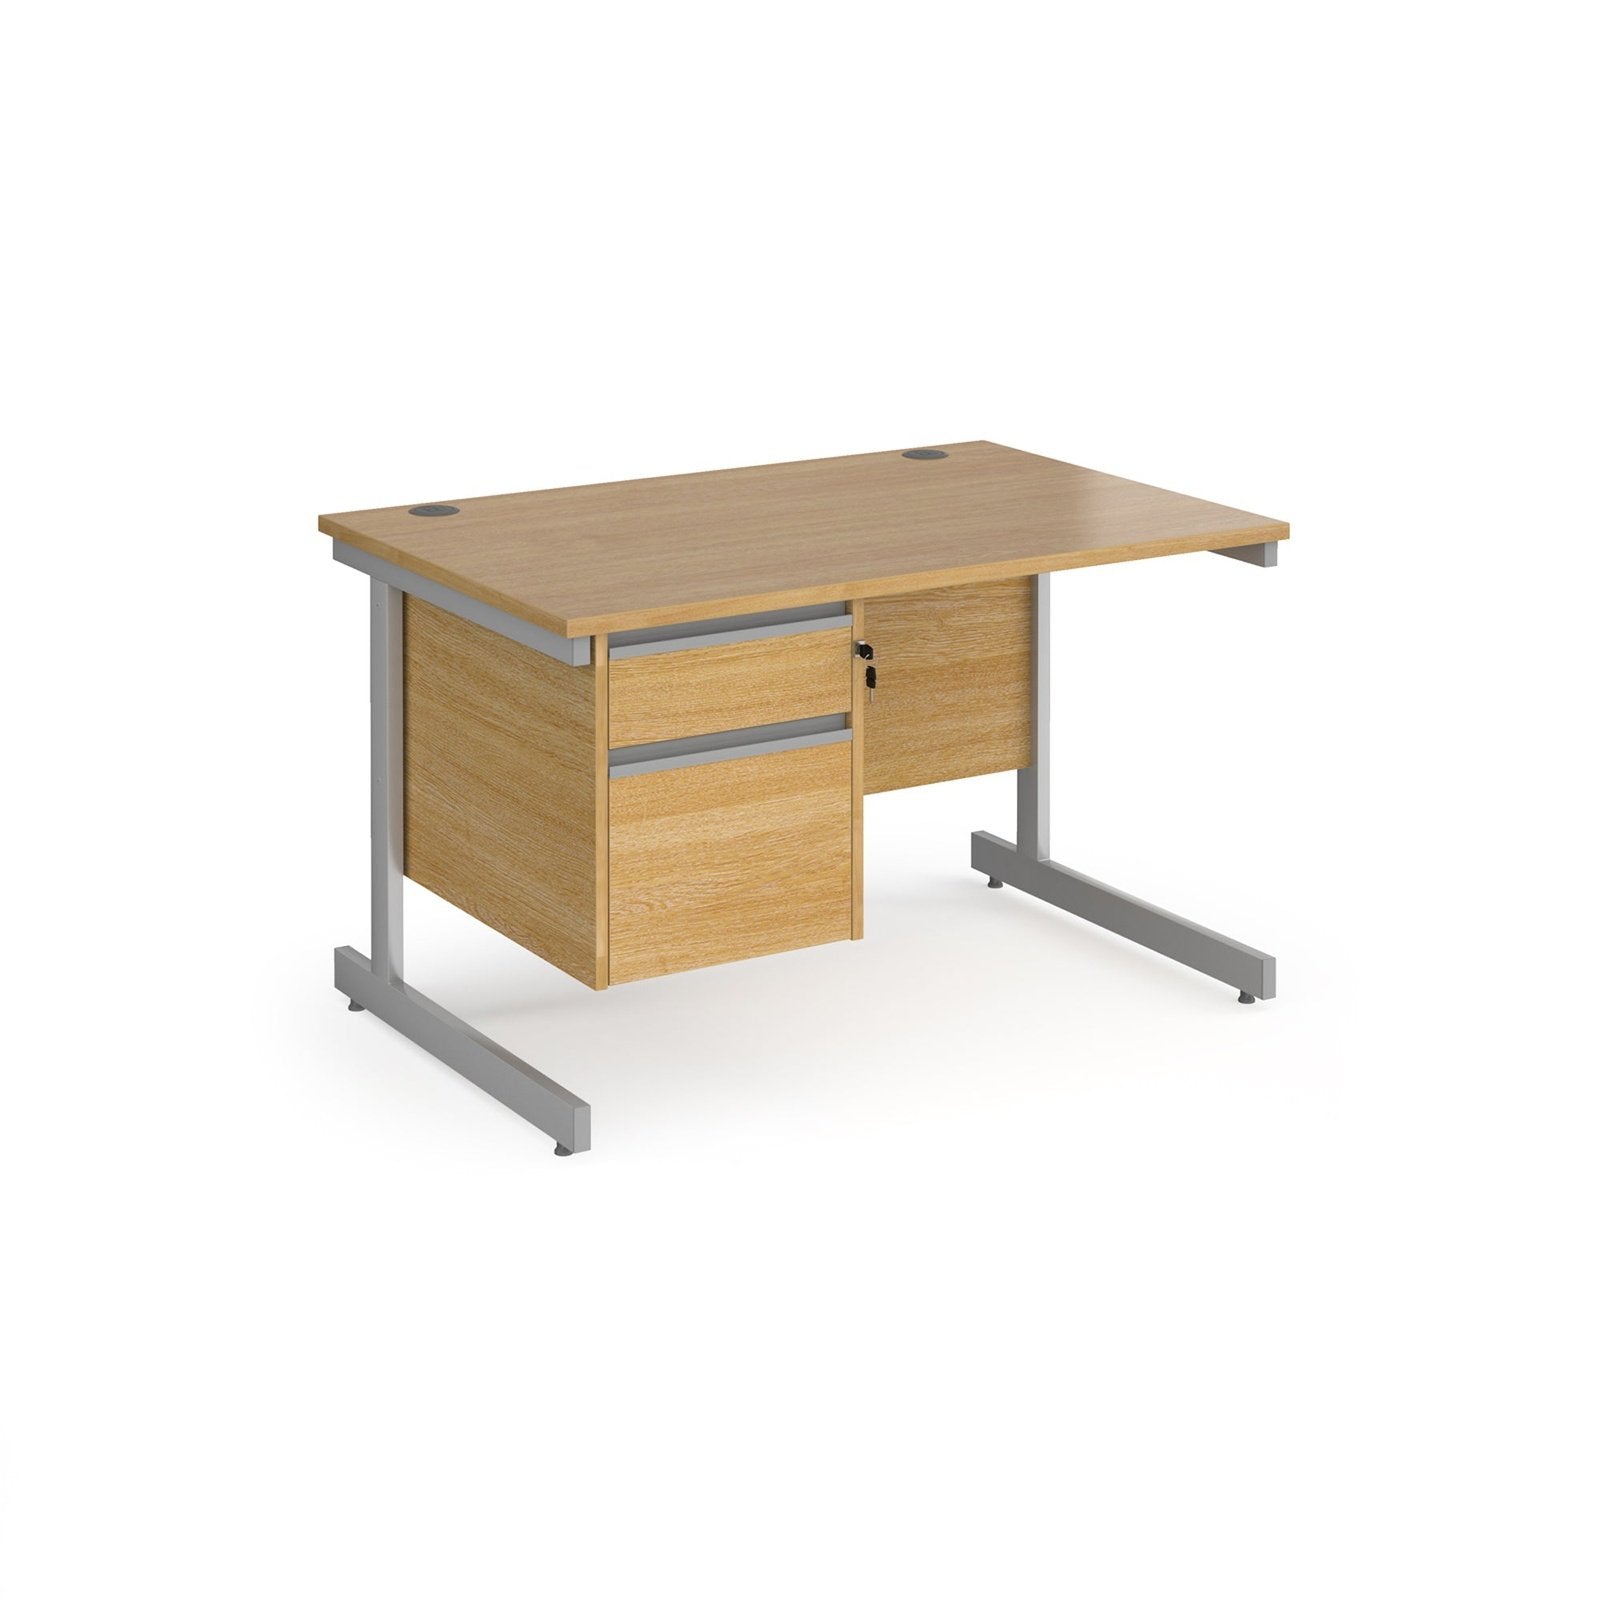 Contract 25 straight desk with 2 drawer pedestsl and cantilever leg - Office Products Online